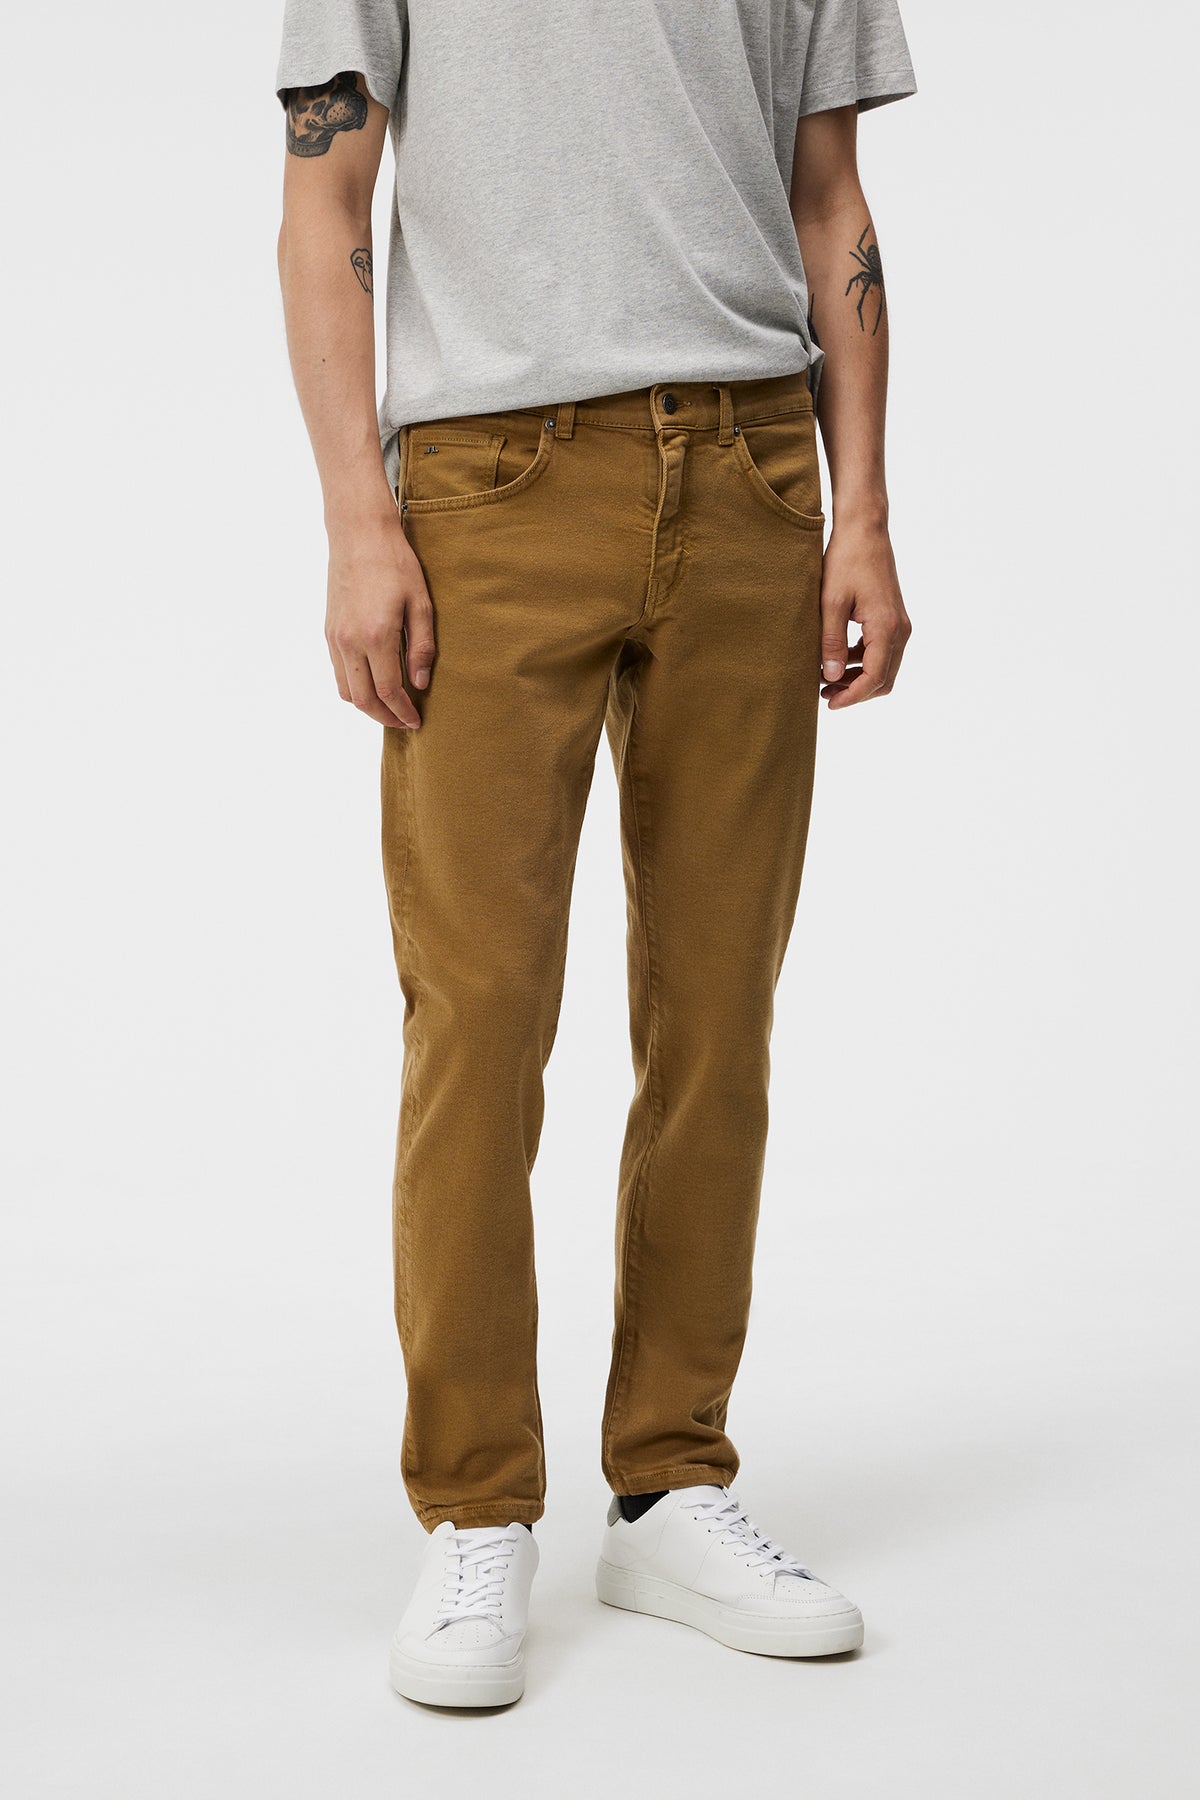 Jay-Solid Stretch / Oxford Tan – J.Lindeberg